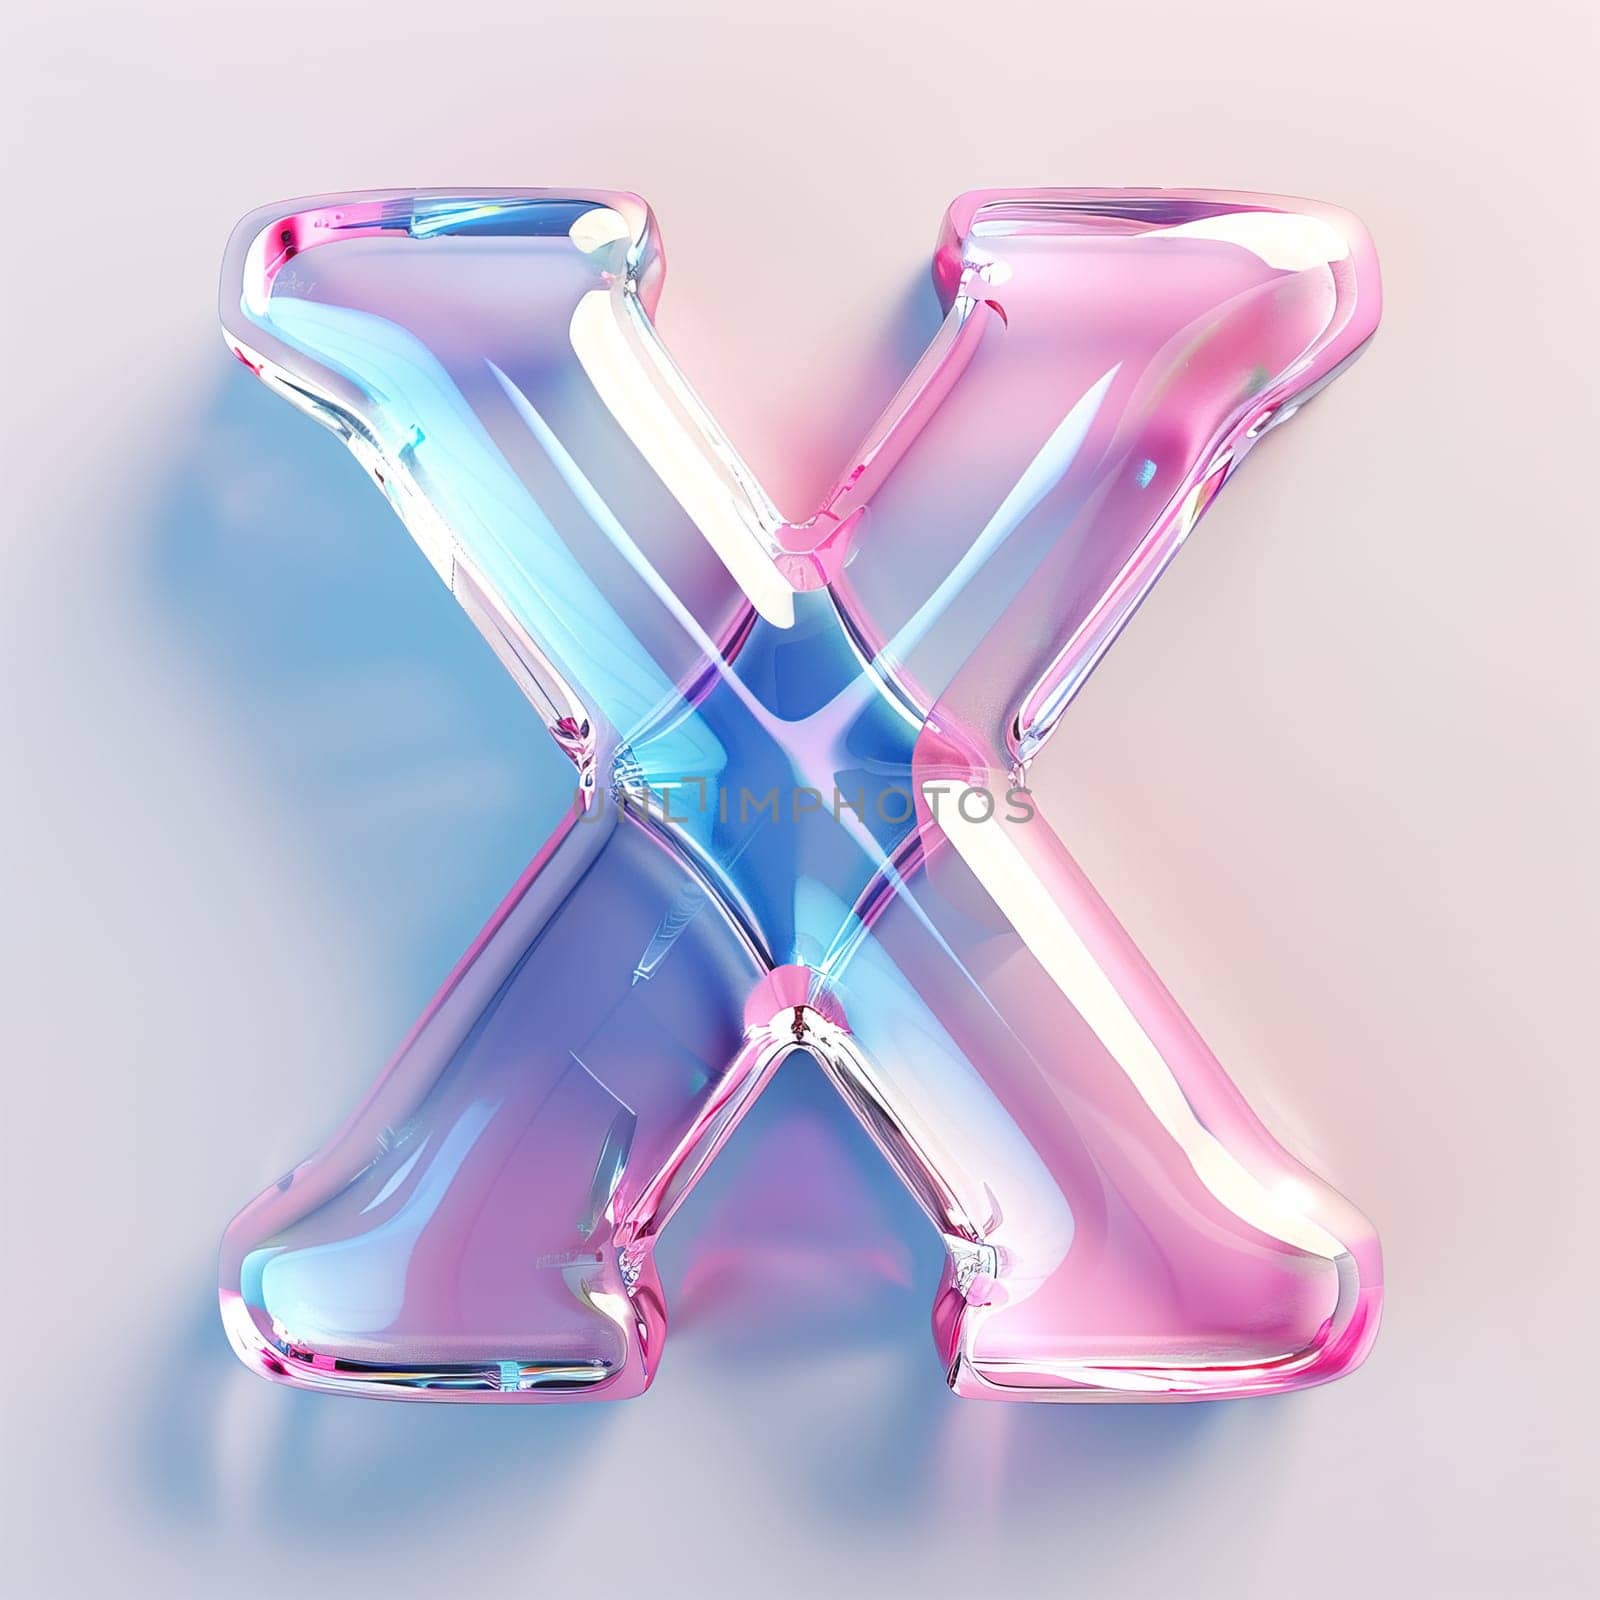 glassy pink and blue letter A for logo in the style of neumorphism, soft natural lighting, simple and elegant space, close-up, super high detaill